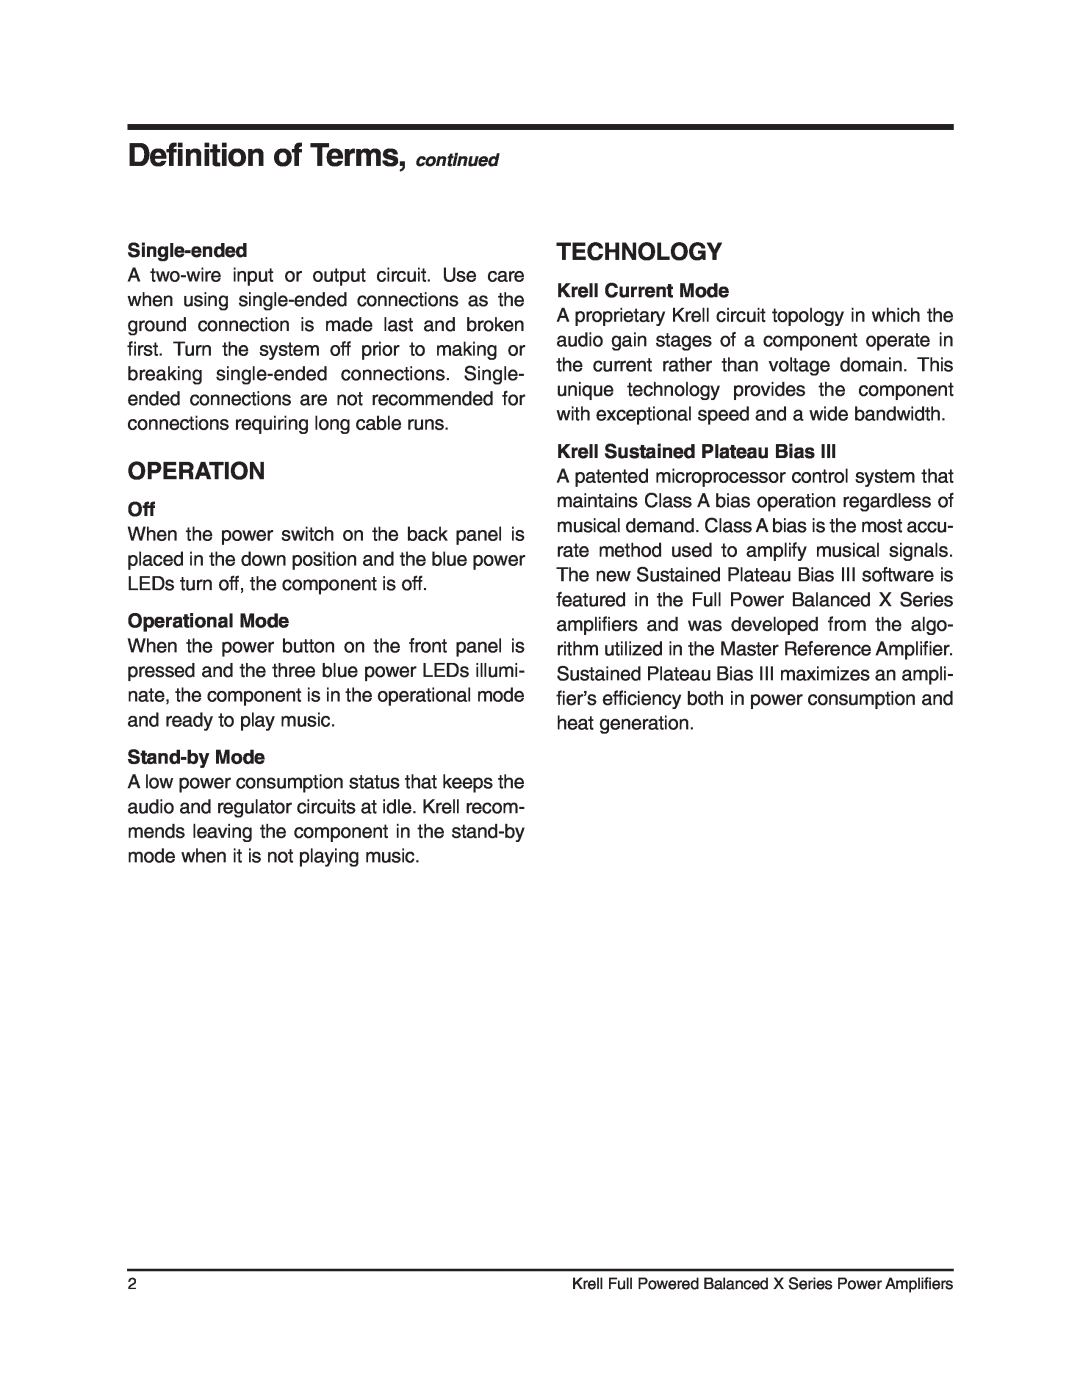 Krell Industries 450Mcx manual Definition of Terms, continued, Technology, Single-ended, Operational Mode, Stand-byMode 